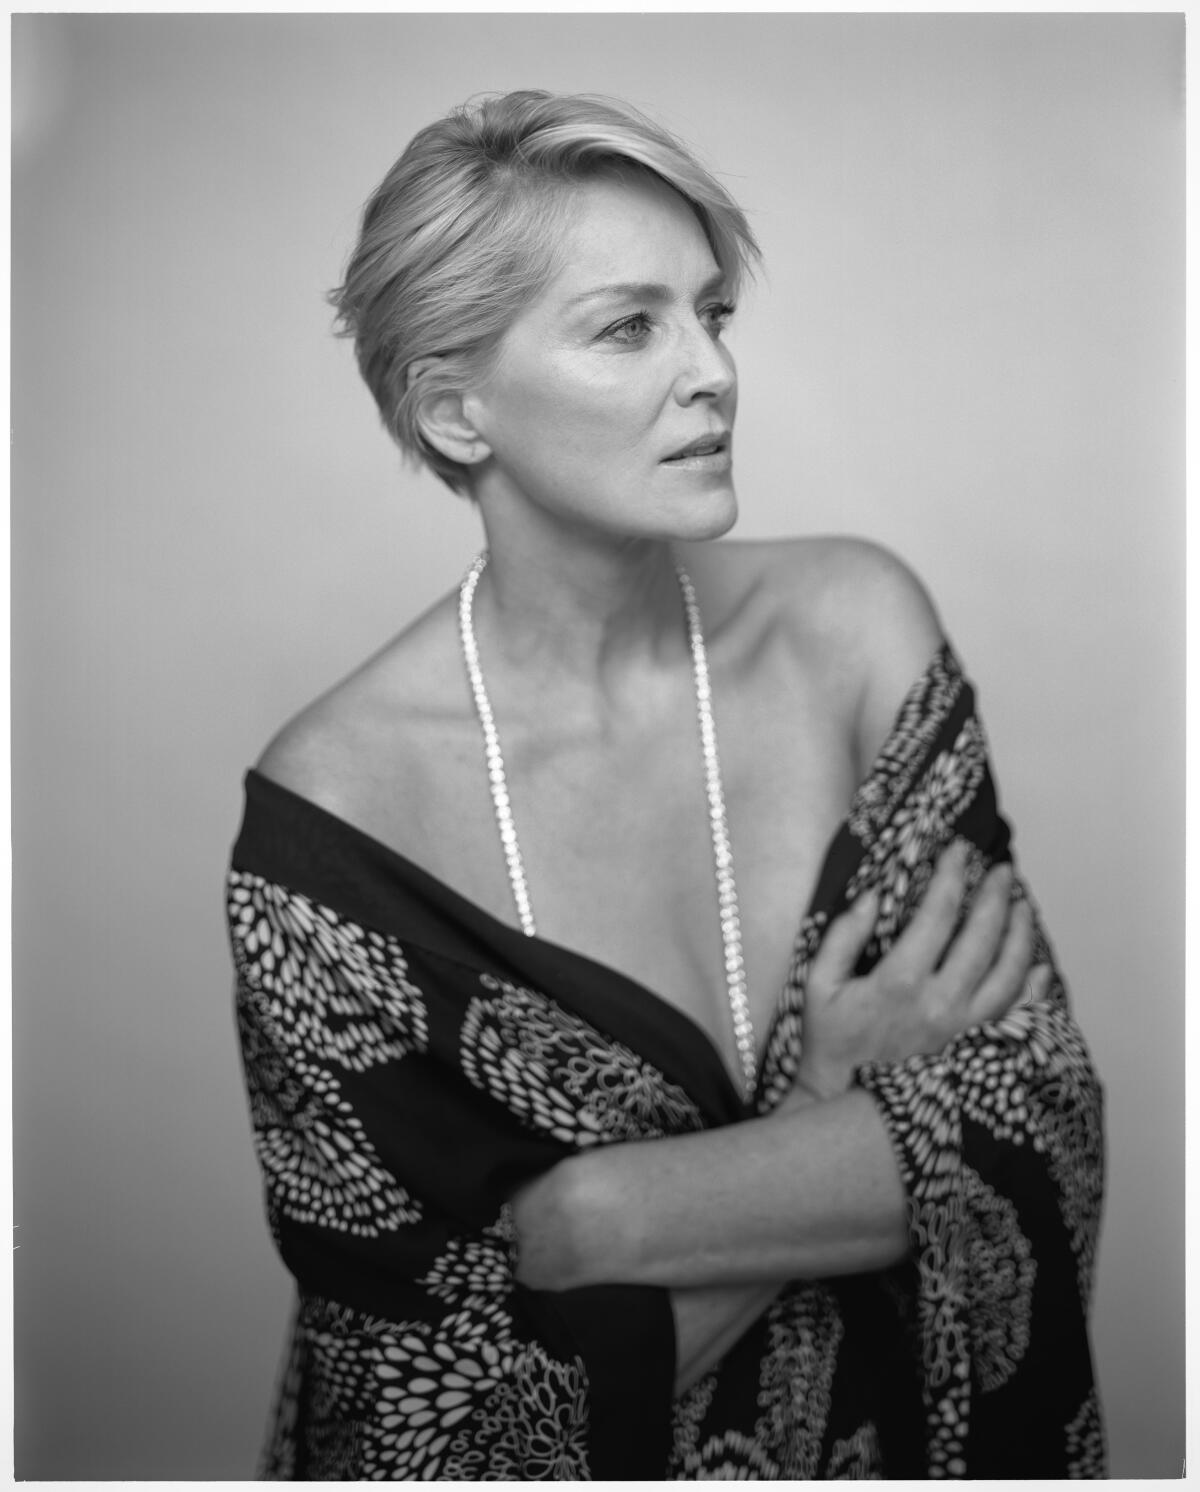 A large-format, black-and-white photo of actor Sharon Stone, waist up, looking pensive